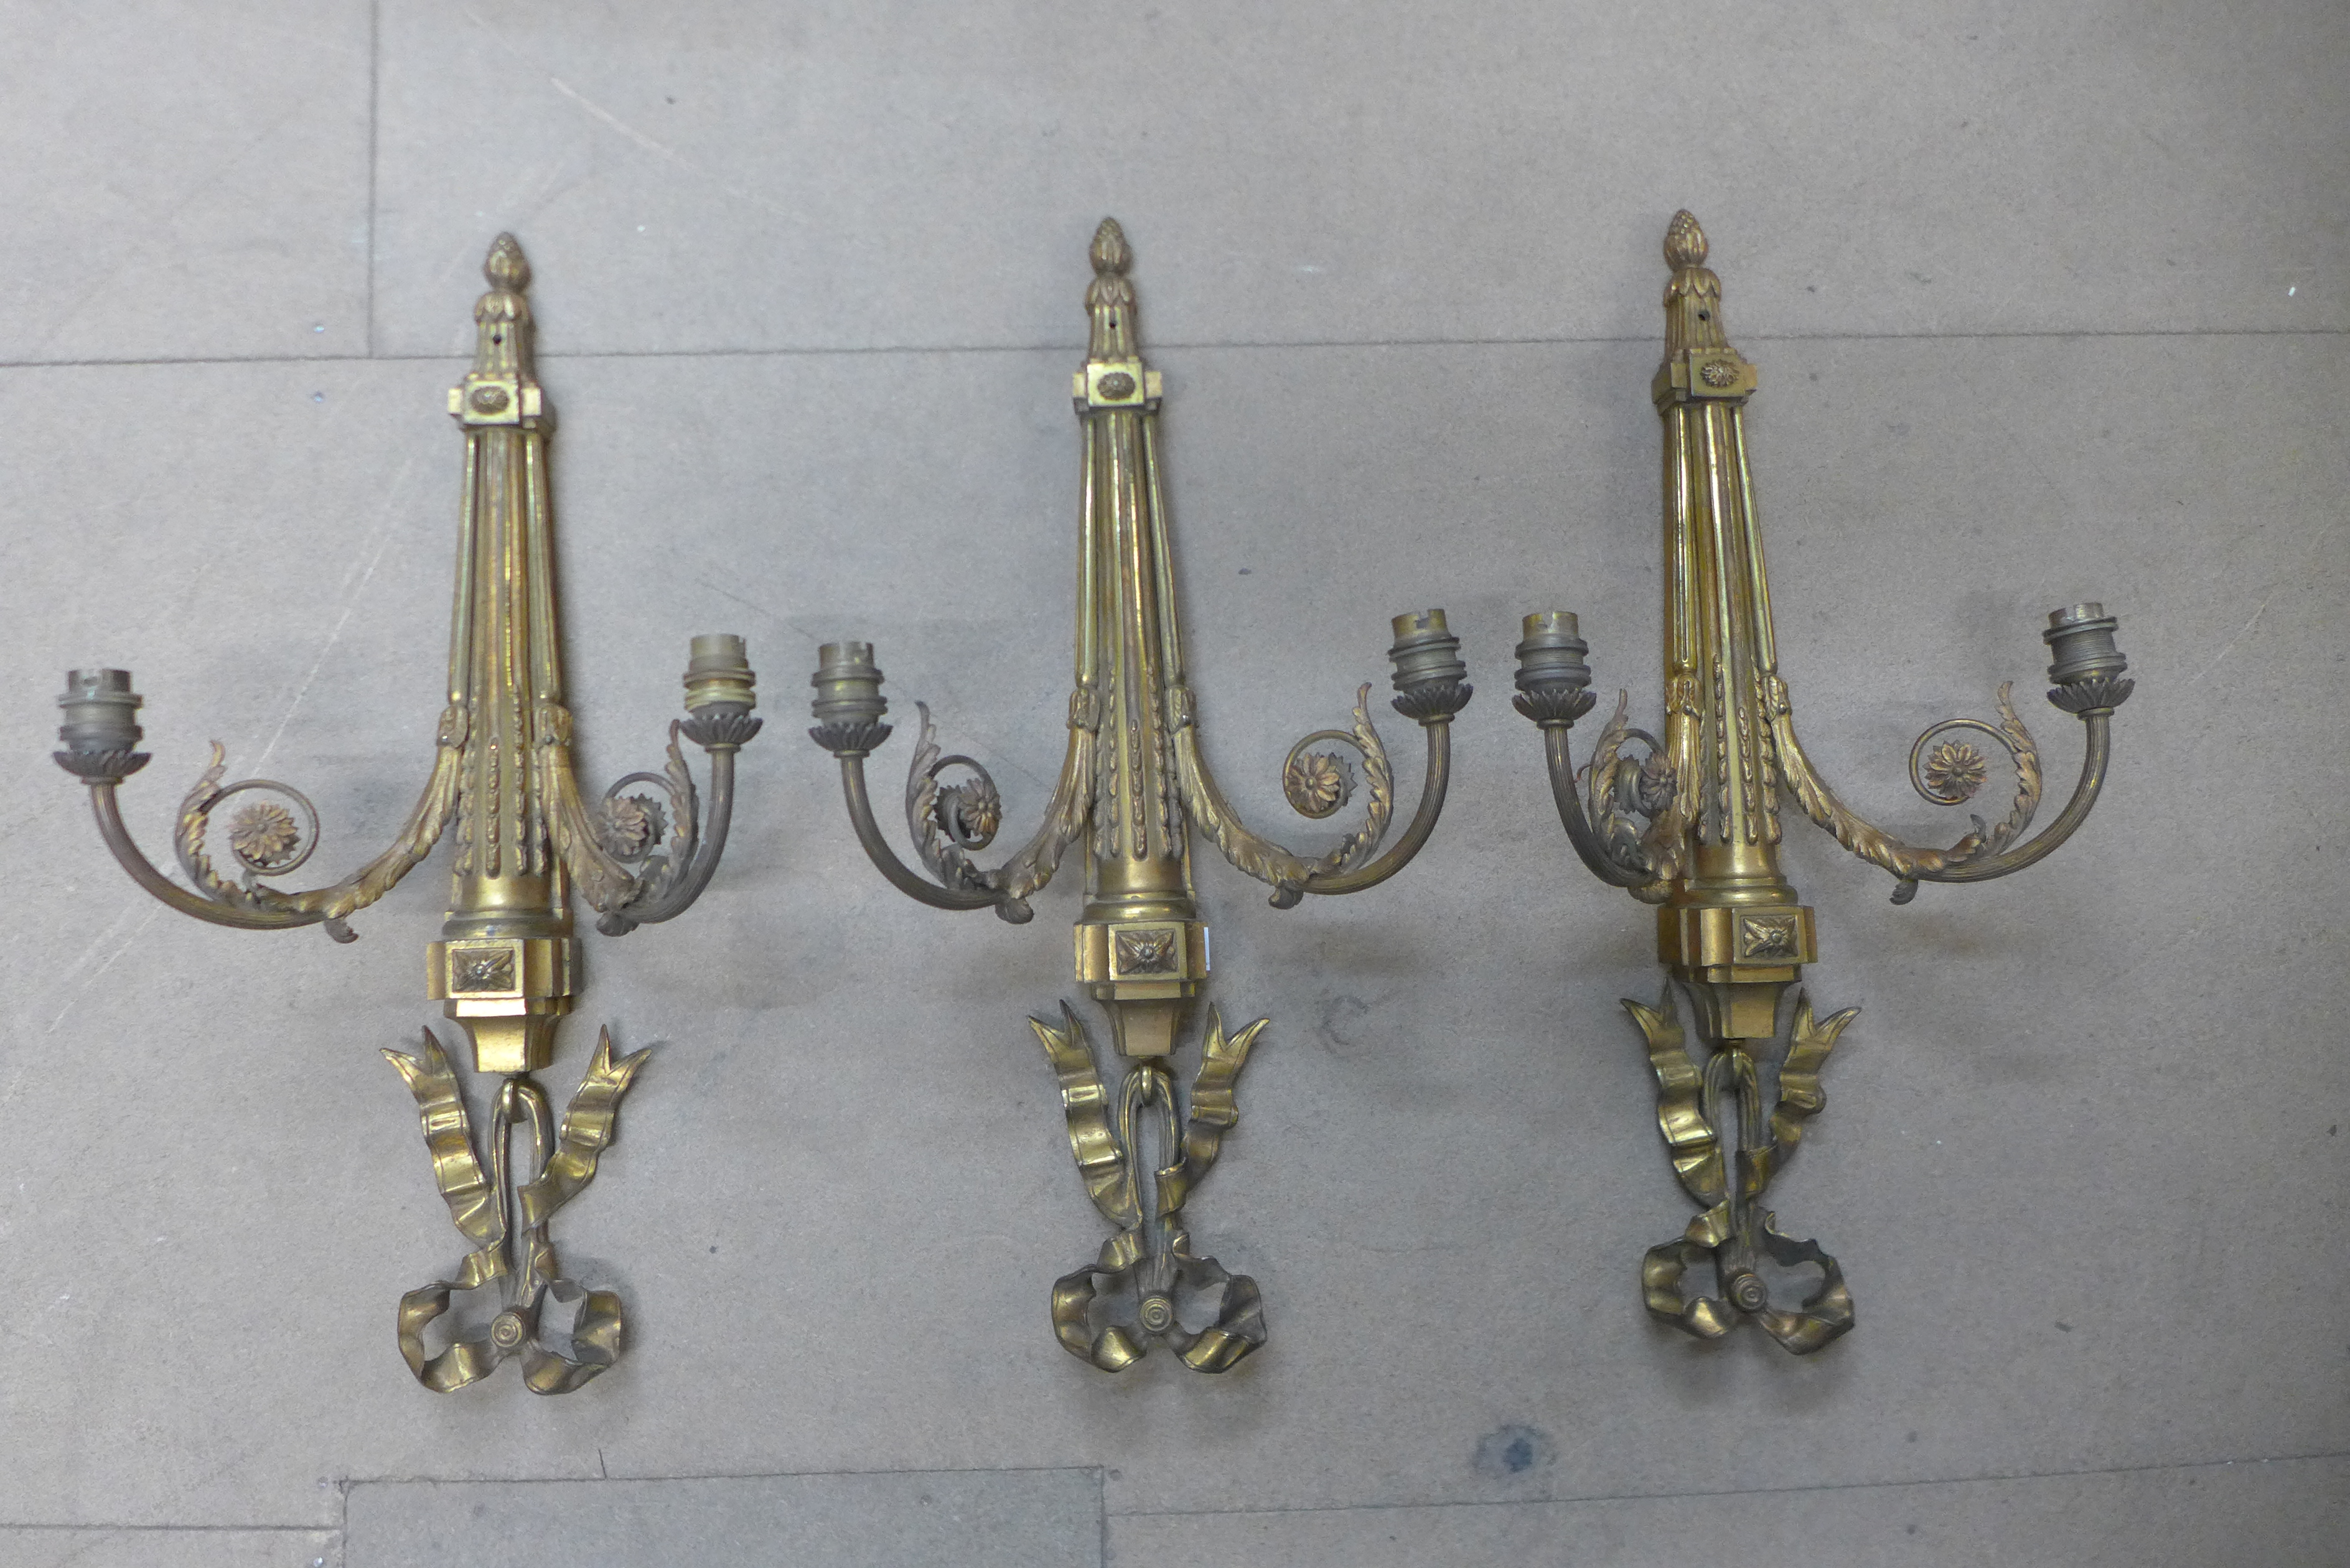 A set of three French Neo-Classical style ormolu electric wall sconces, 59cms h